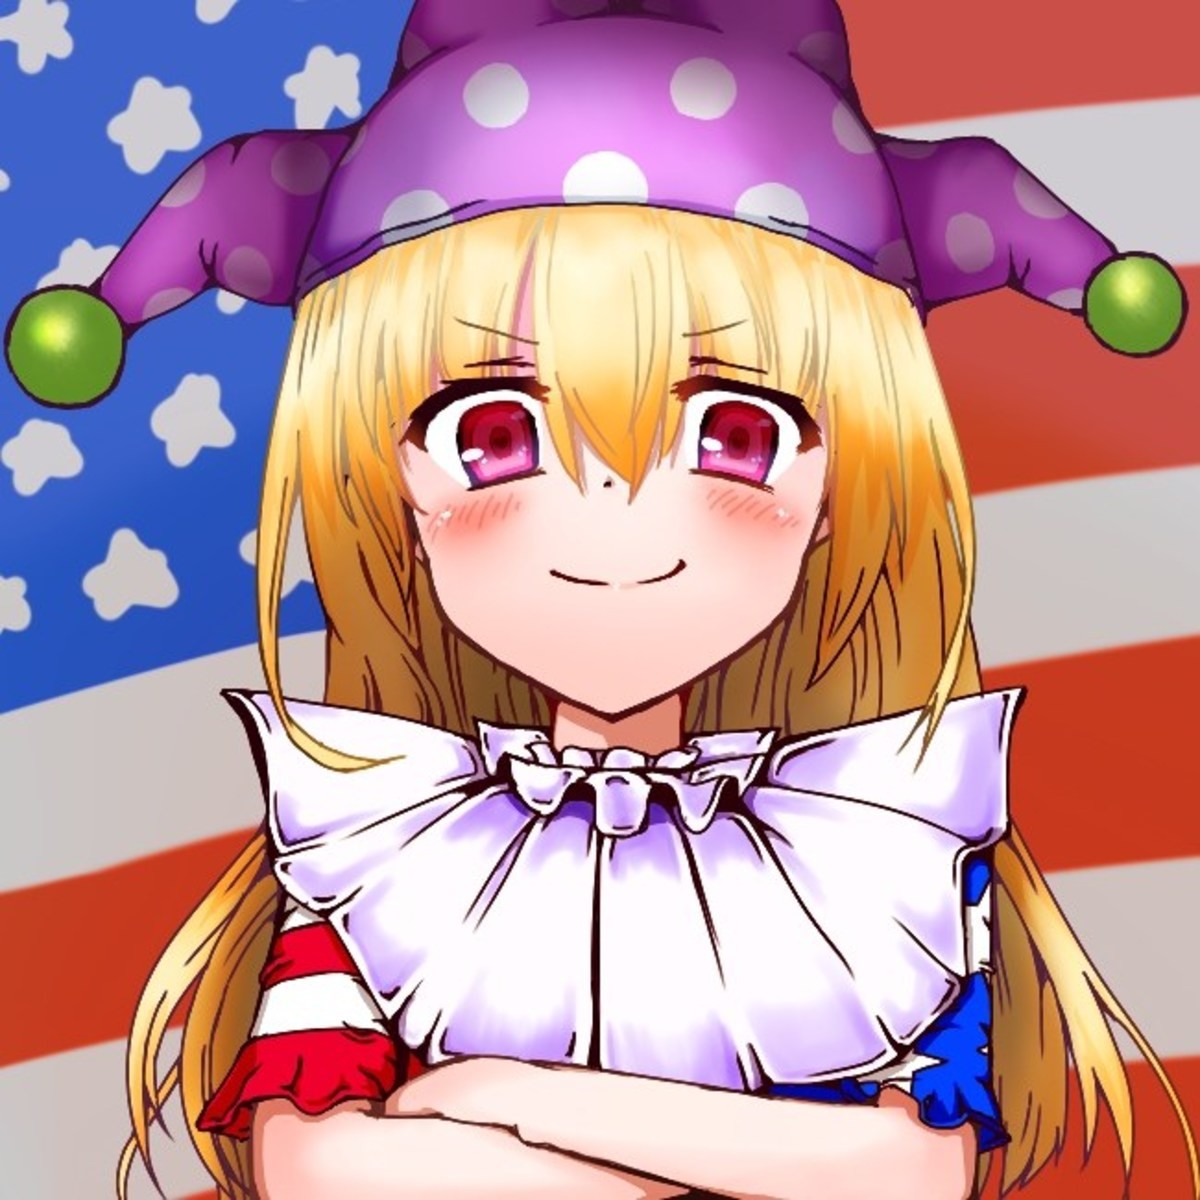 America Day. It is AMERICA DAY my dudes Post your Clappy pics and Clappy content inb4 time zones.. Dumbo clown